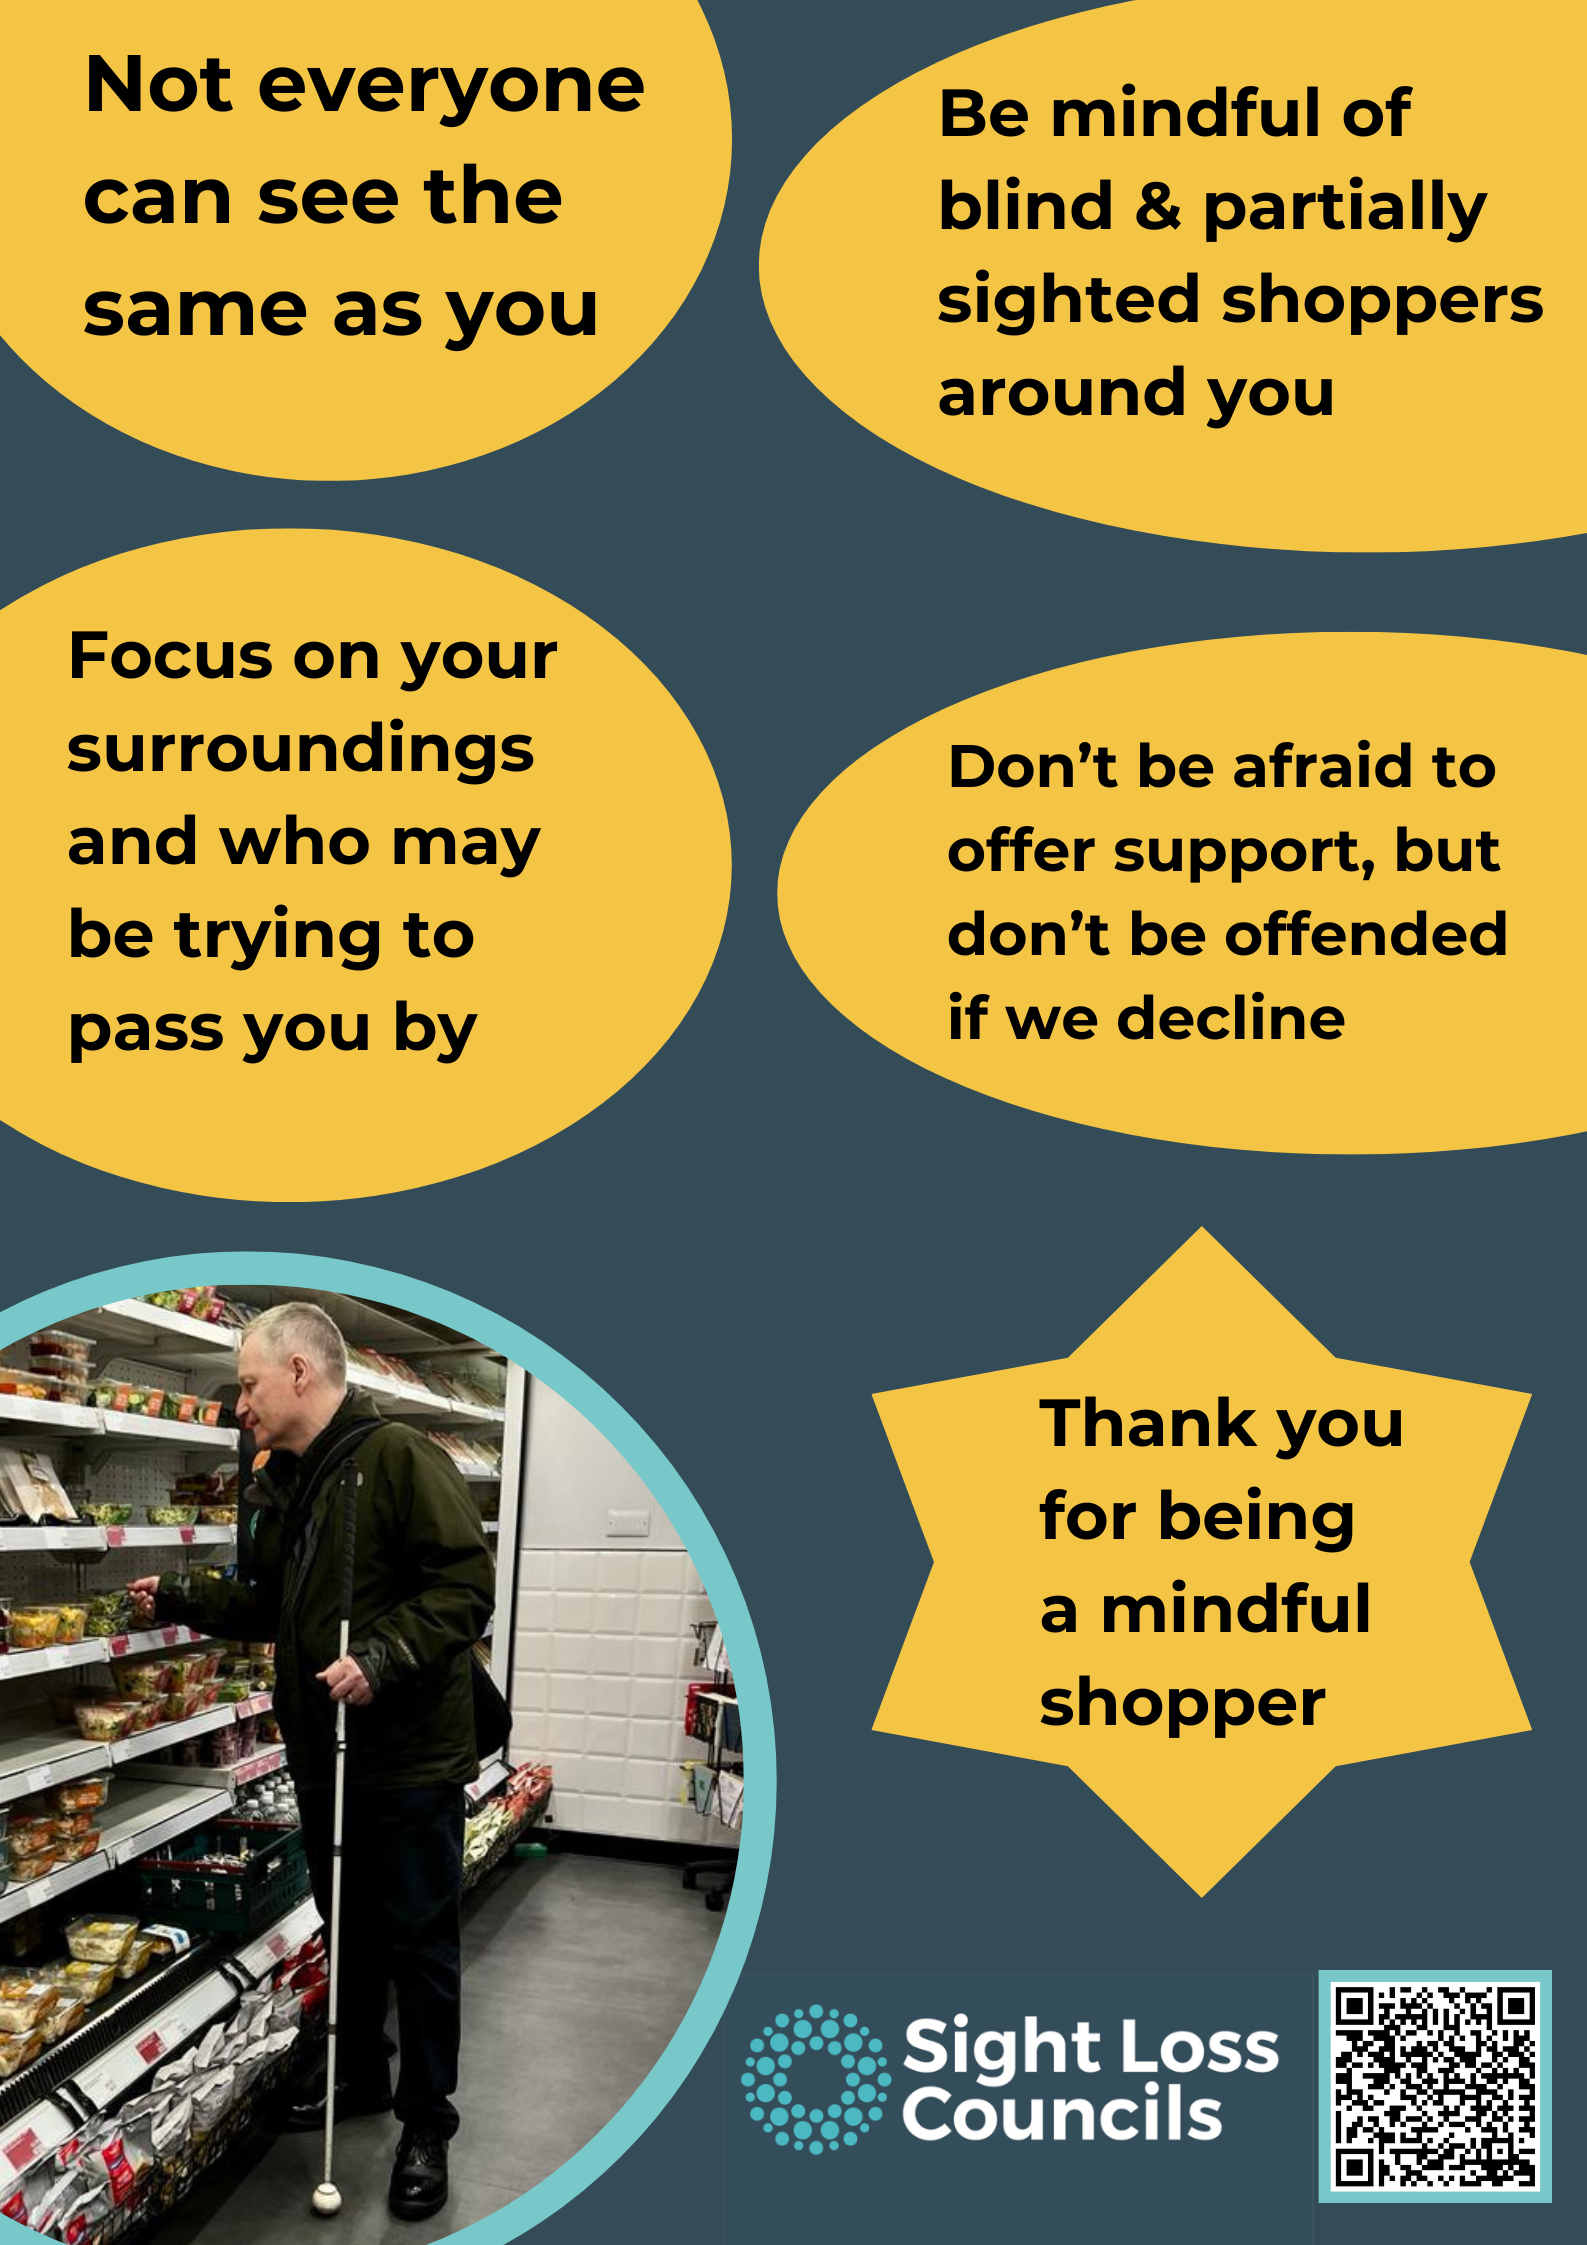 A dark blue poster with four oval text boxes, and one yellow star text box. The text reads: "Not everyone can see the same as you”, “Be mindful of blind and partially sighted shoppers around you”, “Focus on your surroundings and who may be trying to pass you by”, “Don’t be afraid to offer support, but don’t be offended if we decline”, “Thank you for being a mindful shopper" In the bottom left-hand corner is a photo of one South West London SLC member, Harry, picking a product up off a shelf. In the bottom right-hand corner is the SLC logo of light blue circular dots and a square QR code, which takes you to the ;Ask Don't Assume’ document.